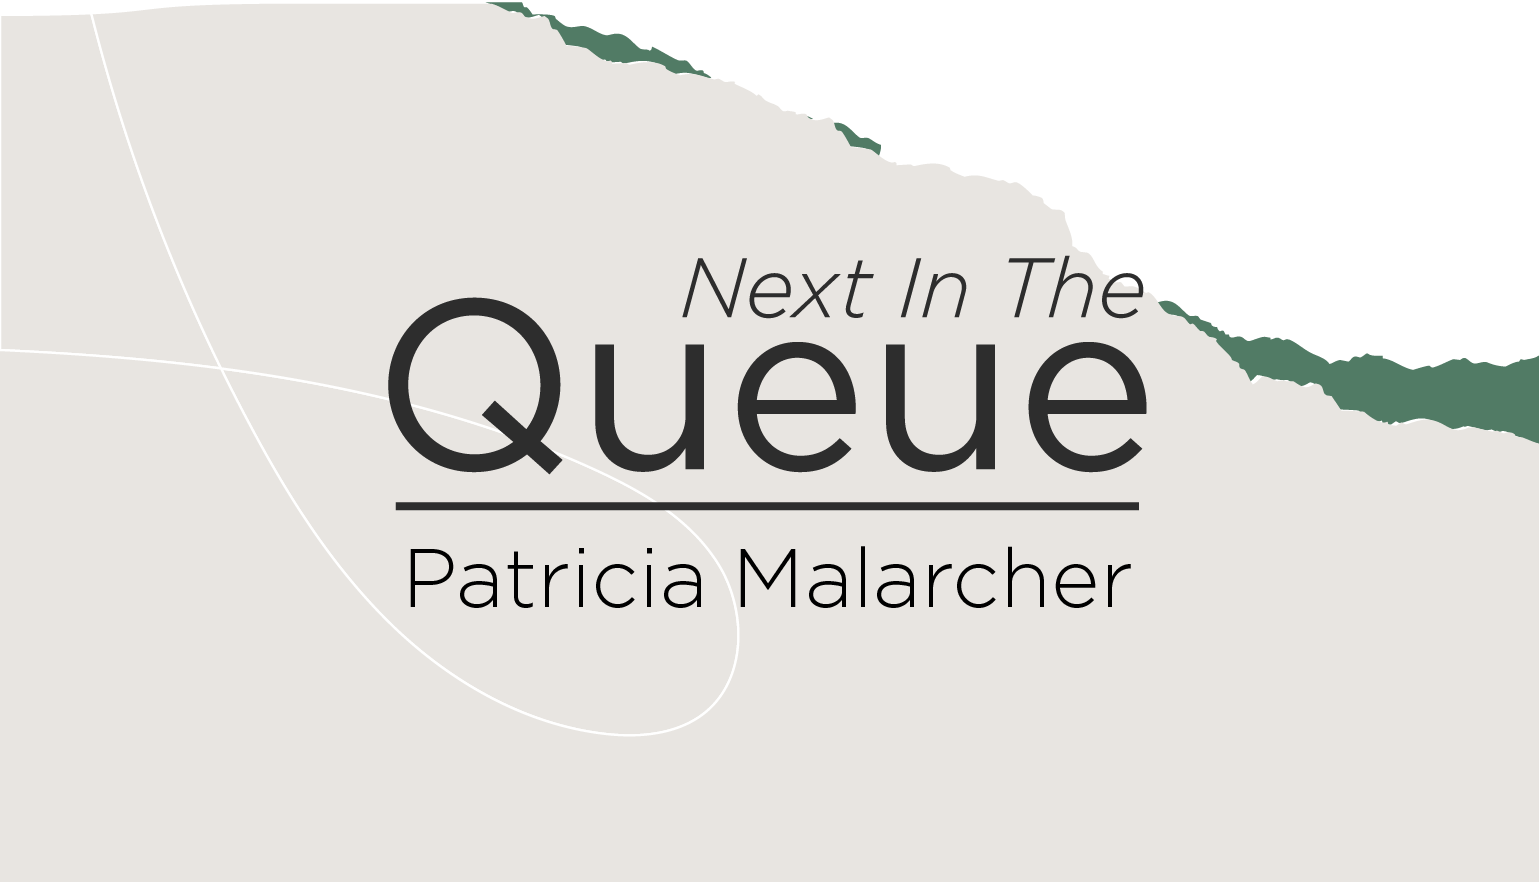 blog post cover graphic for The Queue featuring Patricia Malarcher